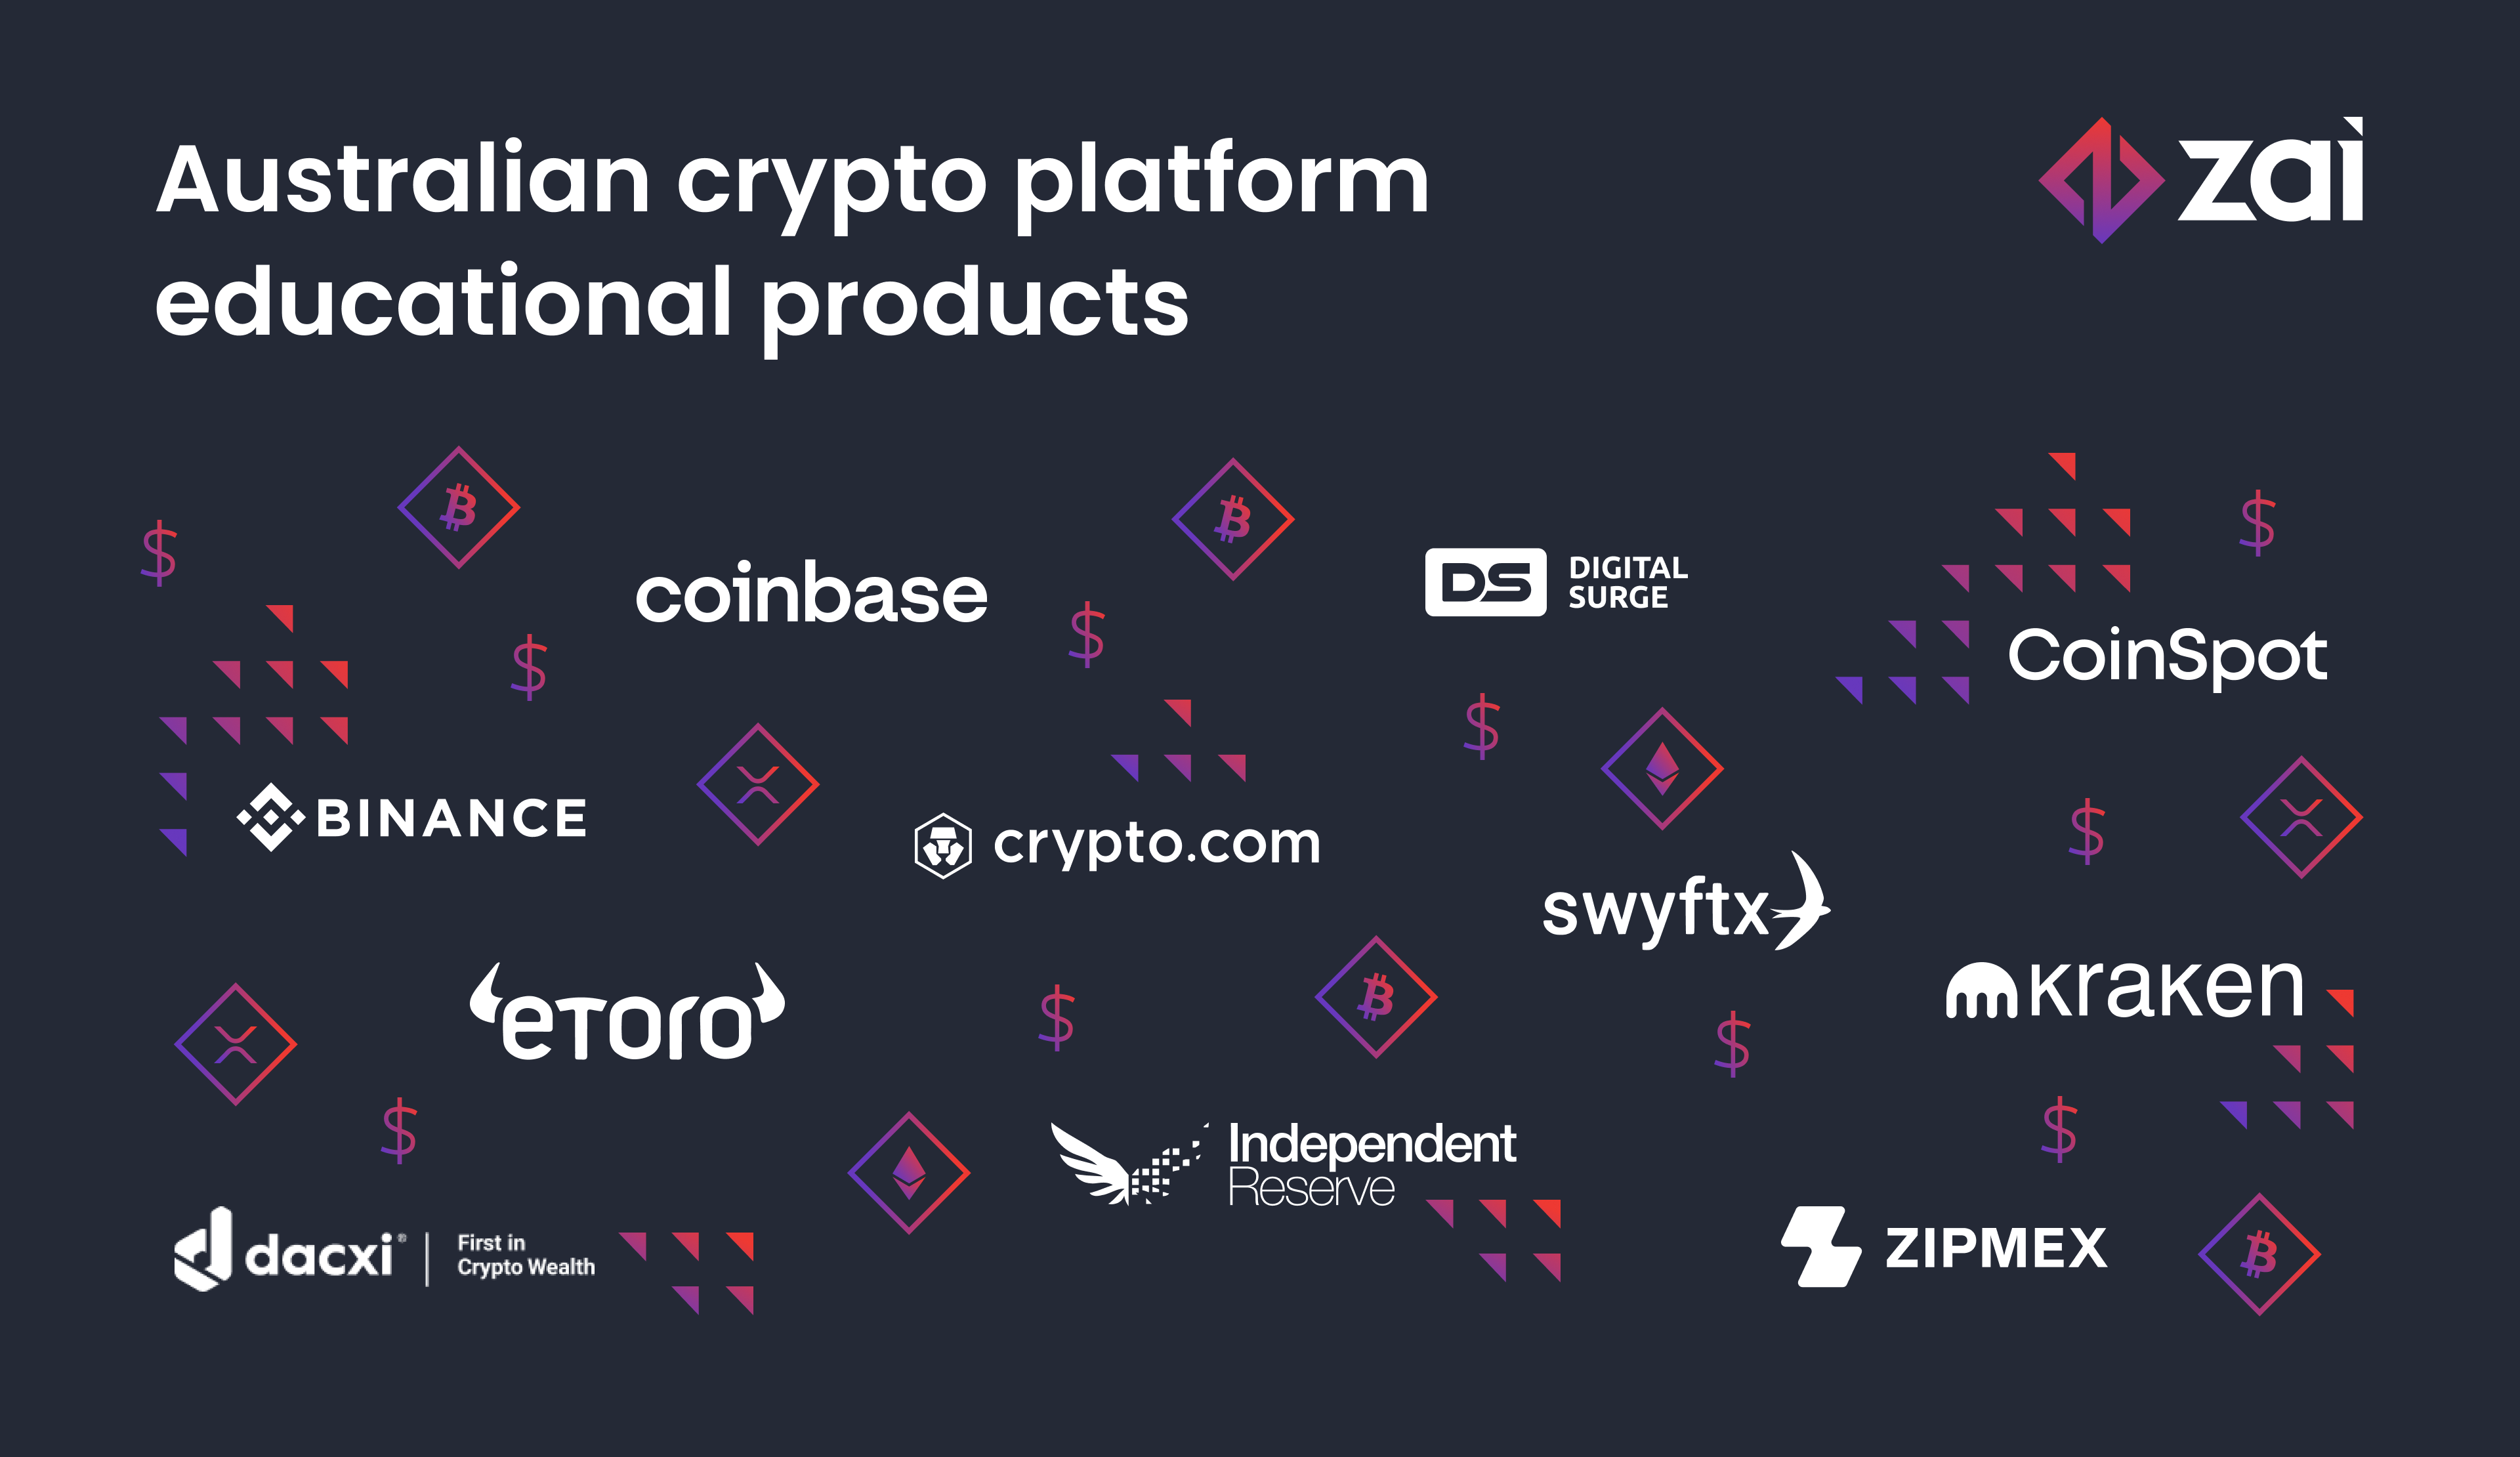 A guide to the best Australian crypto platform educational products